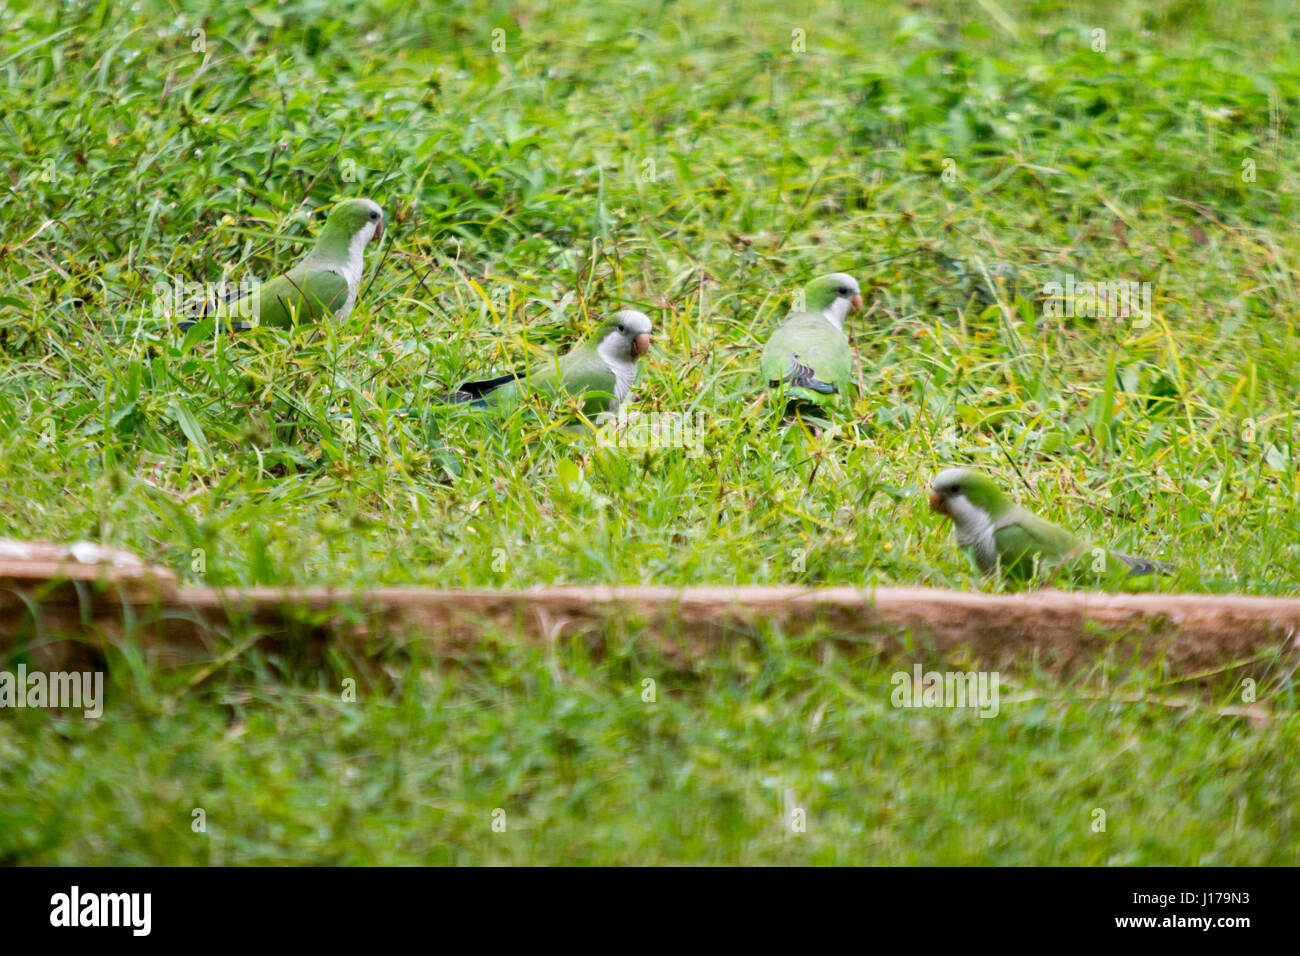 Asuncion, Paraguay. 18th Apr, 2017. Monk parakeets (Myiopsitta monachus), also known as the Quaker parrot, feed on the ground on a cloudy afternoon in Asuncion, Paraguay. Credit: Andre M. Chang/Alamy Live News Stock Photo